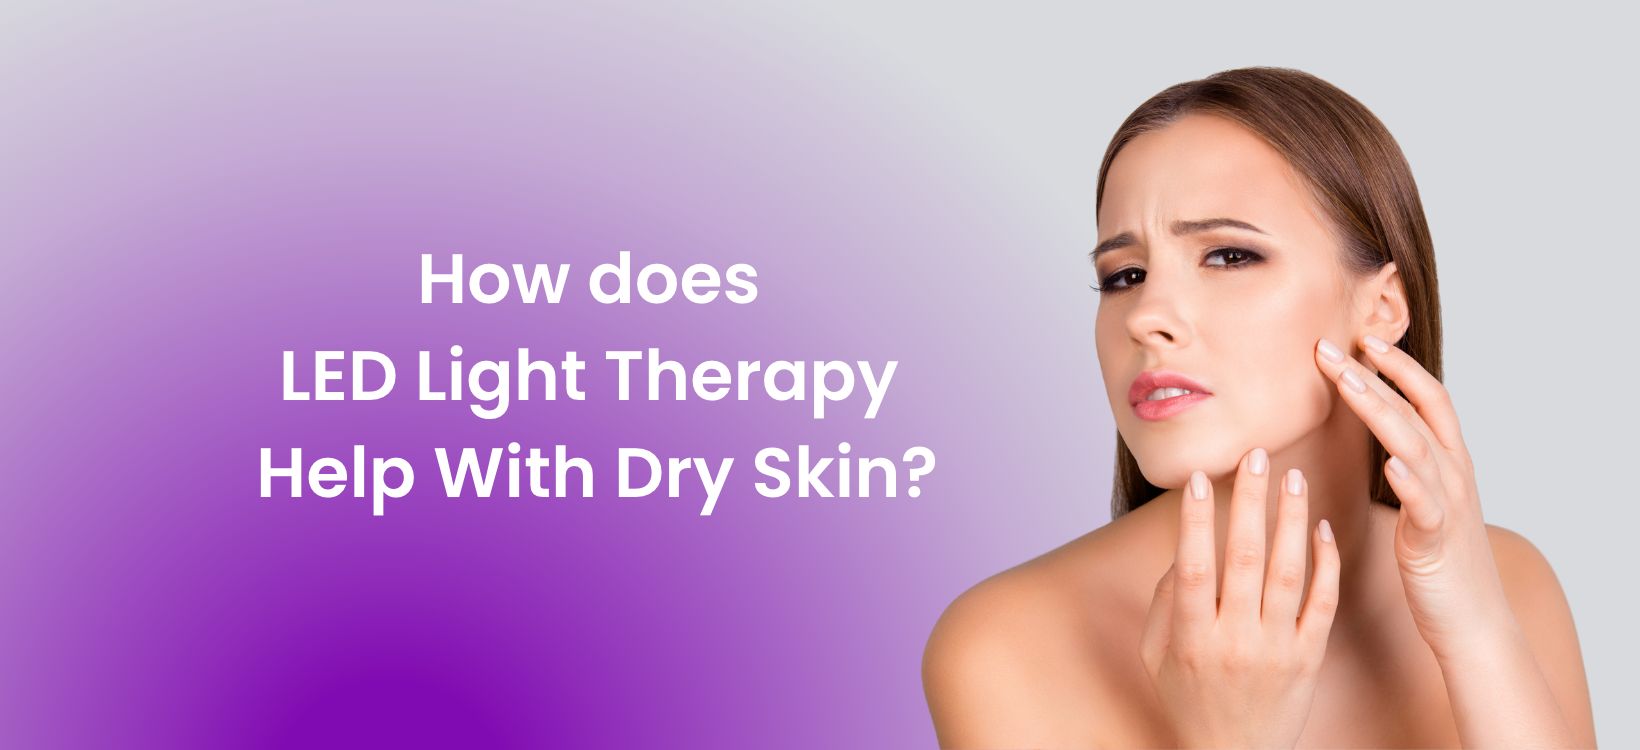 How does LED Light Therapy Help With Dry Skin?